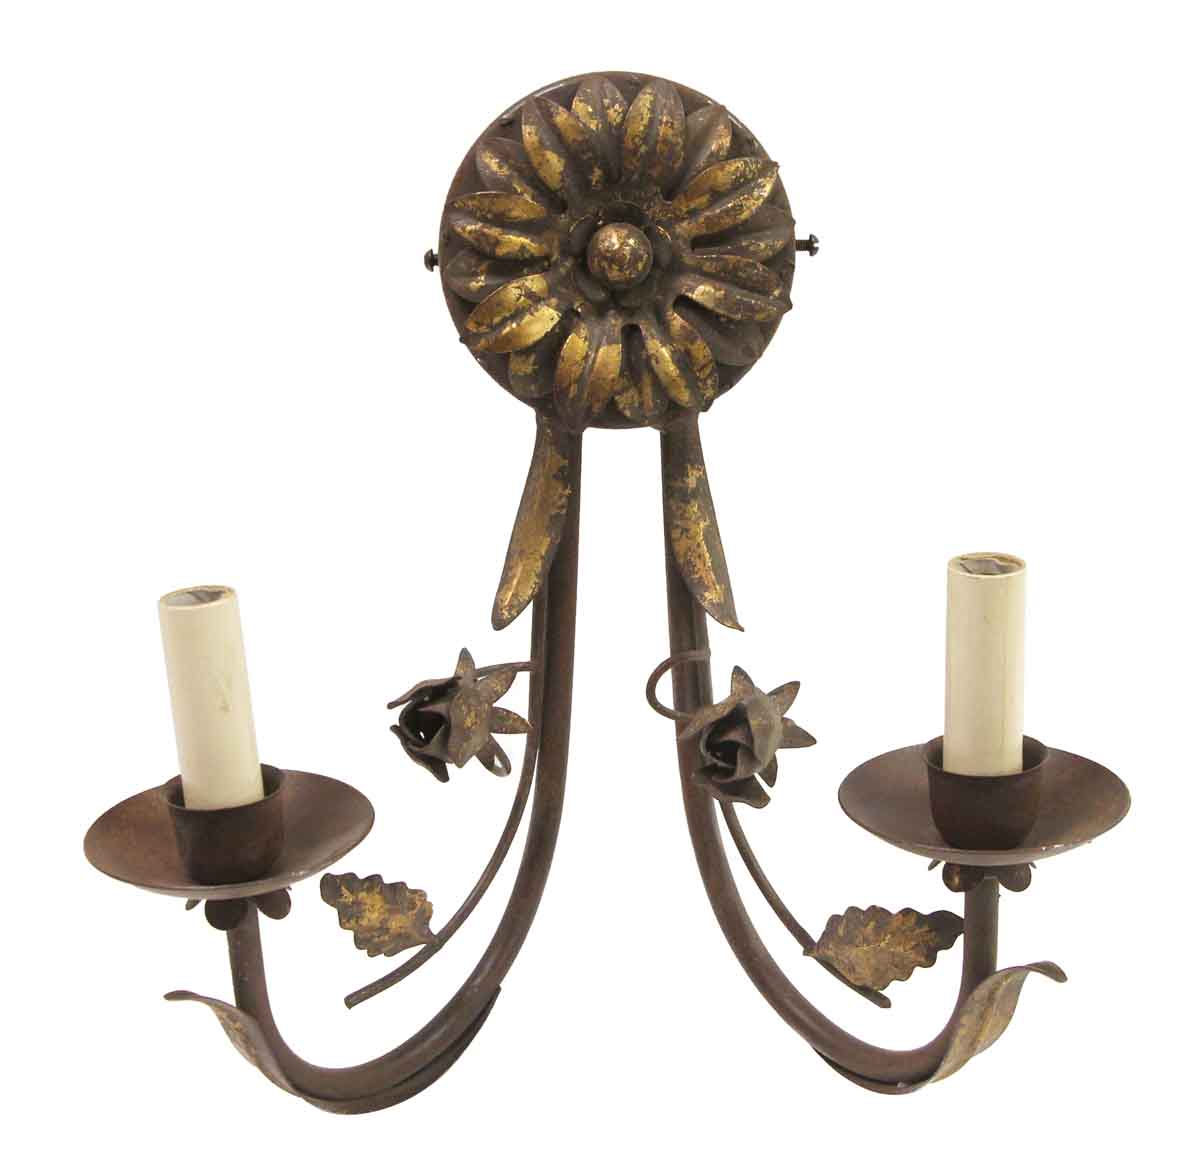 French Style 2 Arm Wrought Iron Floral Wall Sconce | Olde ... on Wrought Iron Wall Sconces id=84373